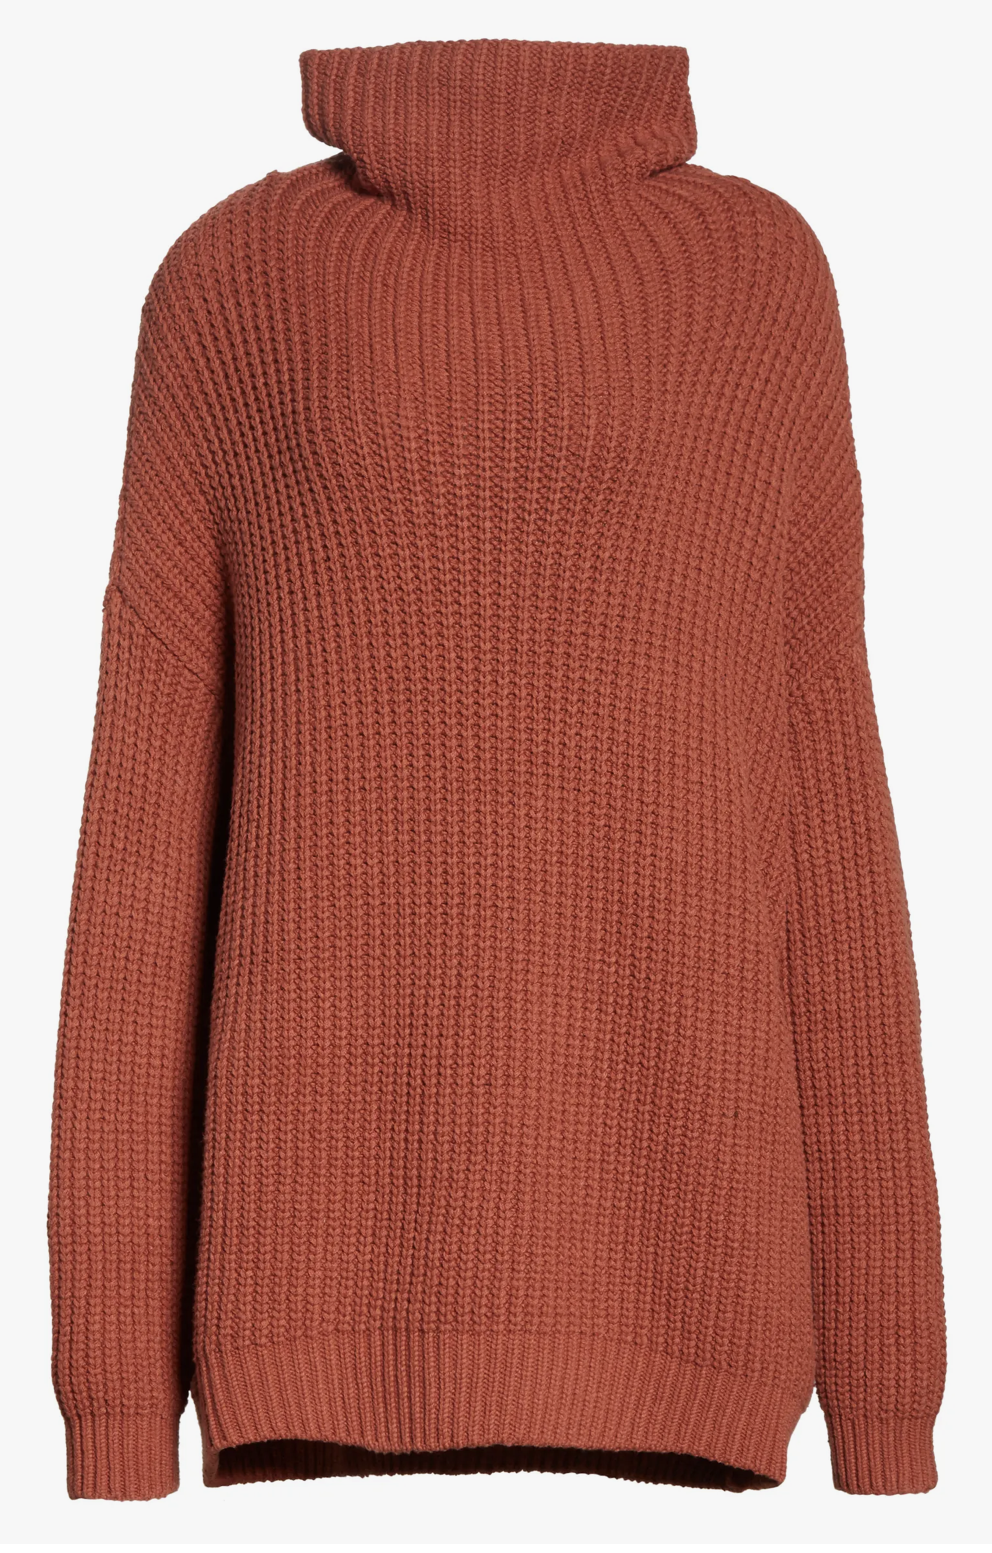 our favorite oversized turtleneck sweater for fall for winter free people sweater on sale in Nordstrom sale